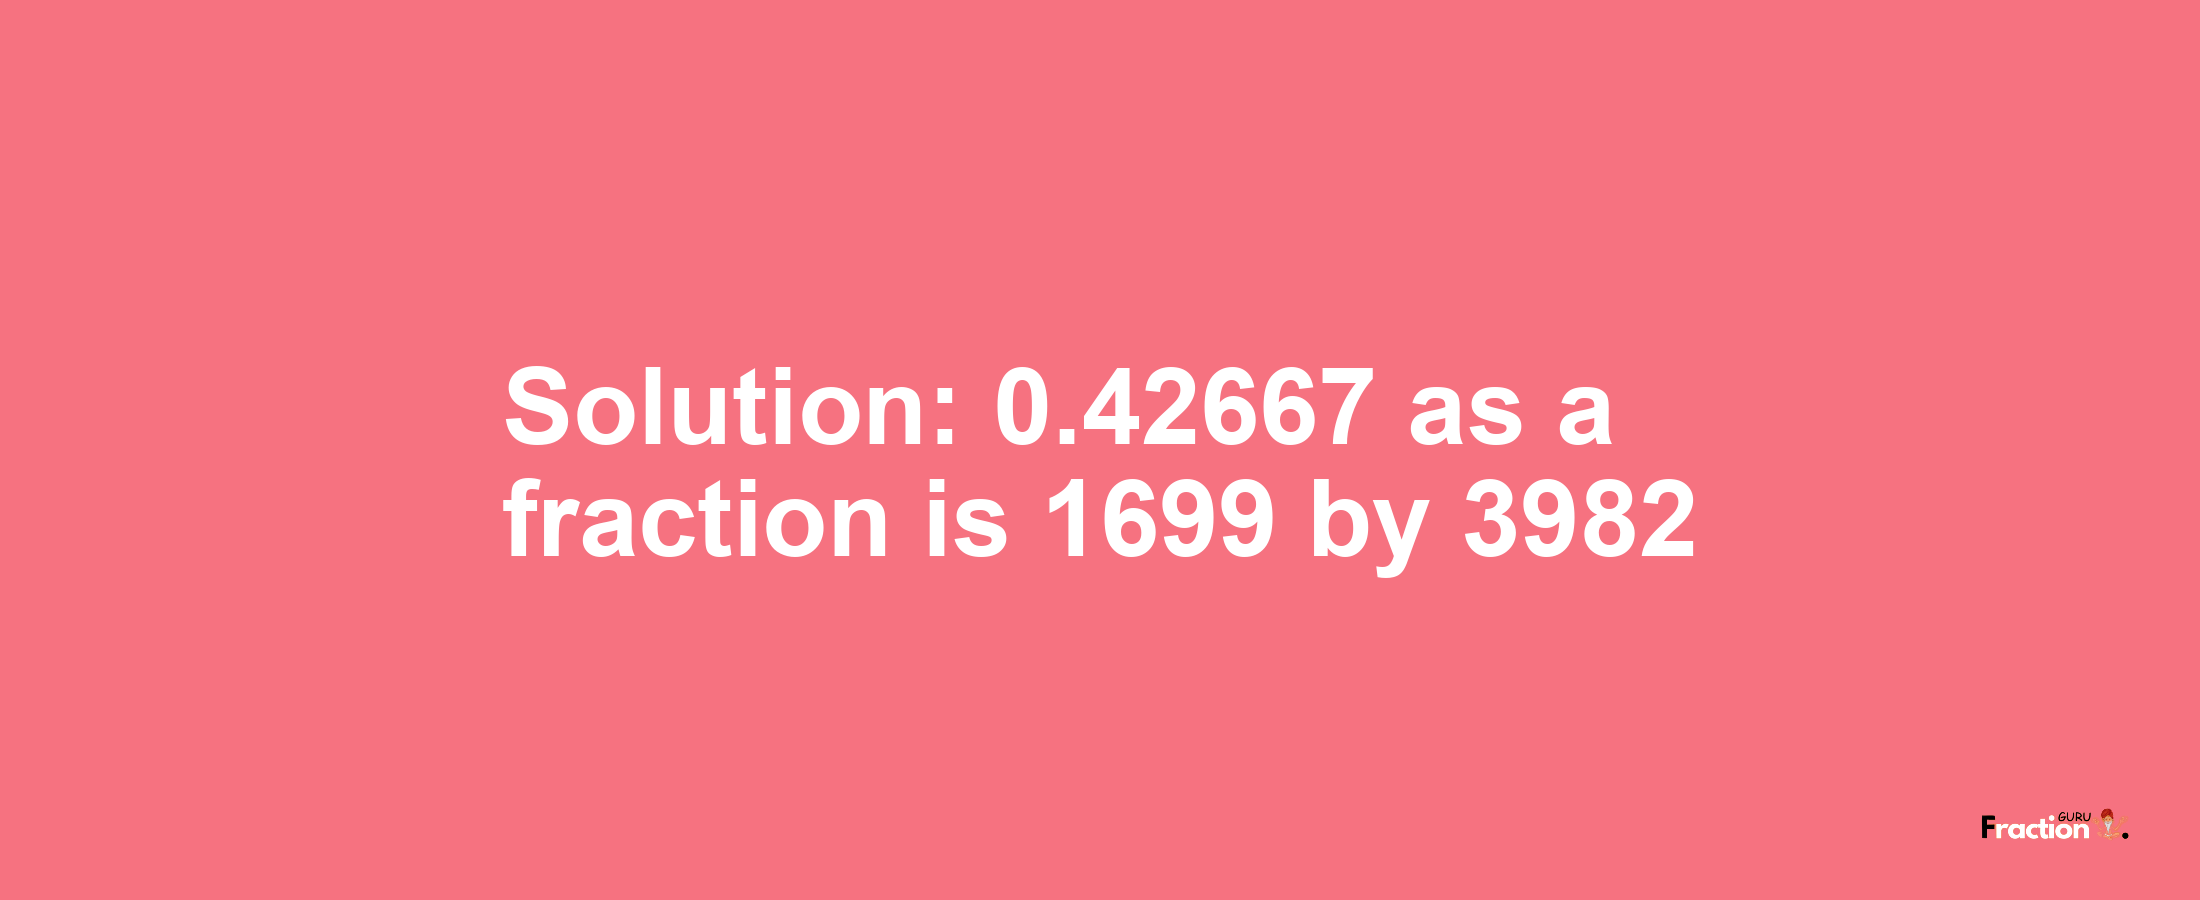 Solution:0.42667 as a fraction is 1699/3982